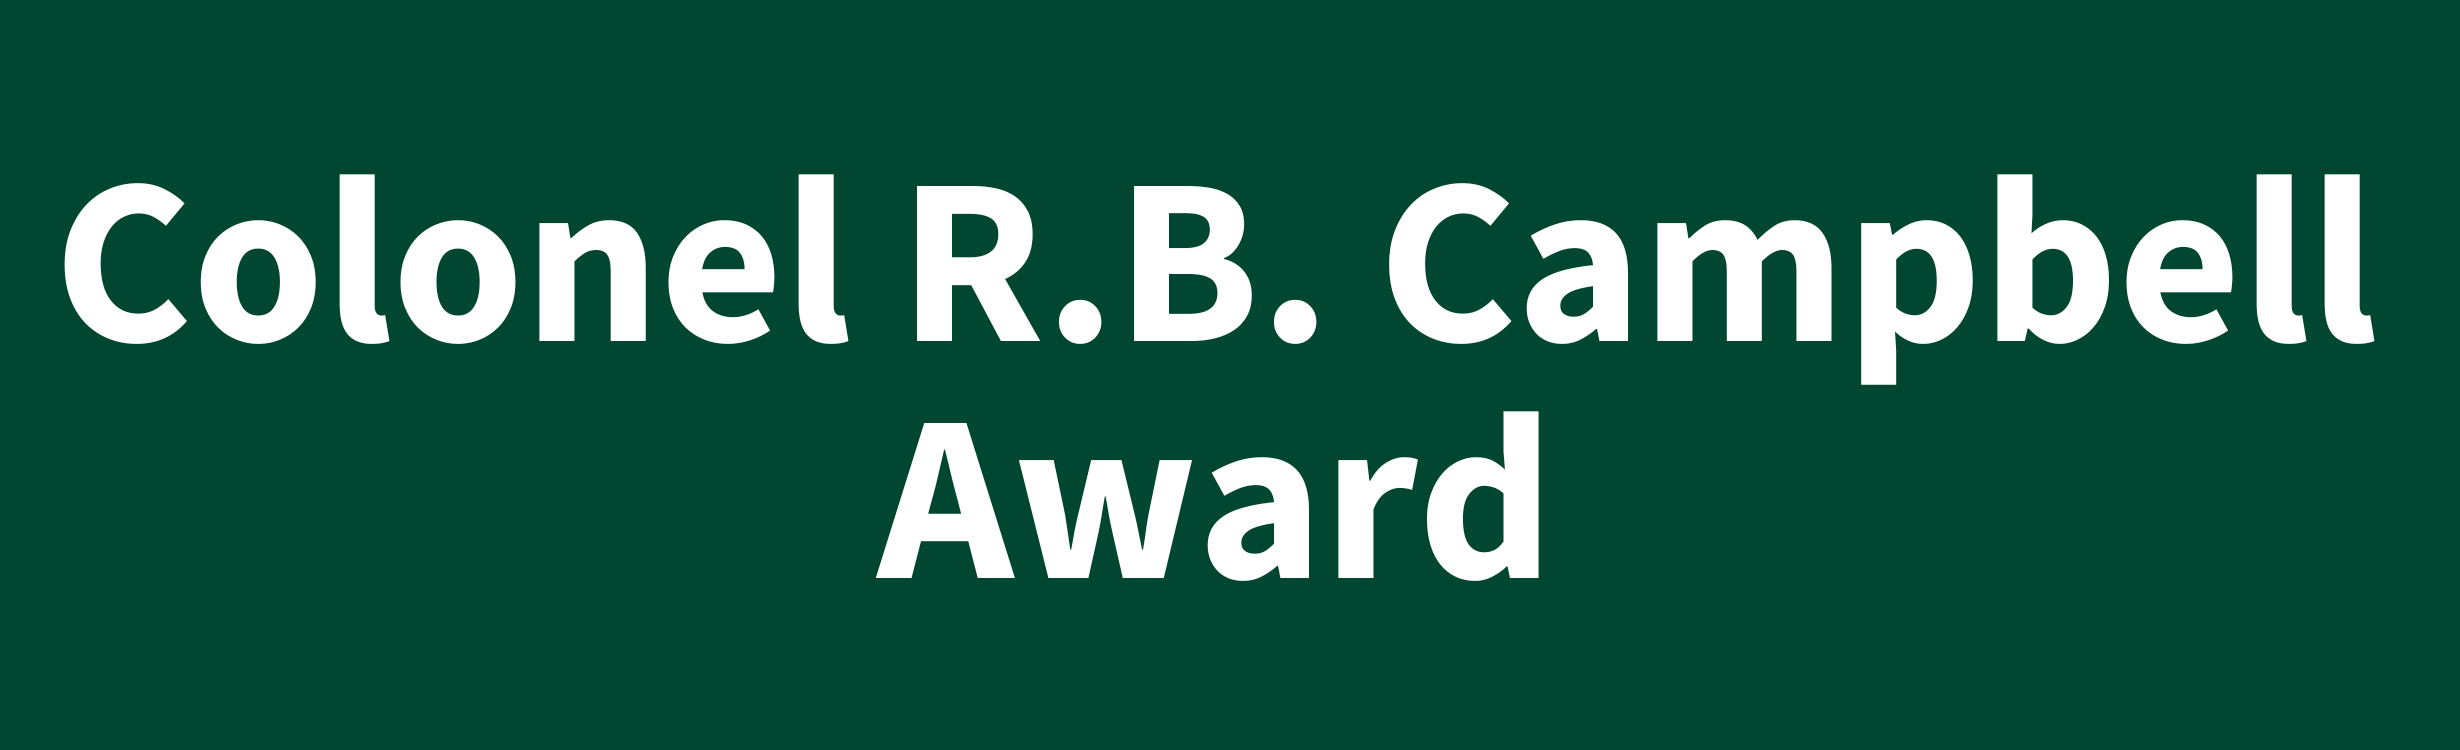 colonel R.B. campbell award